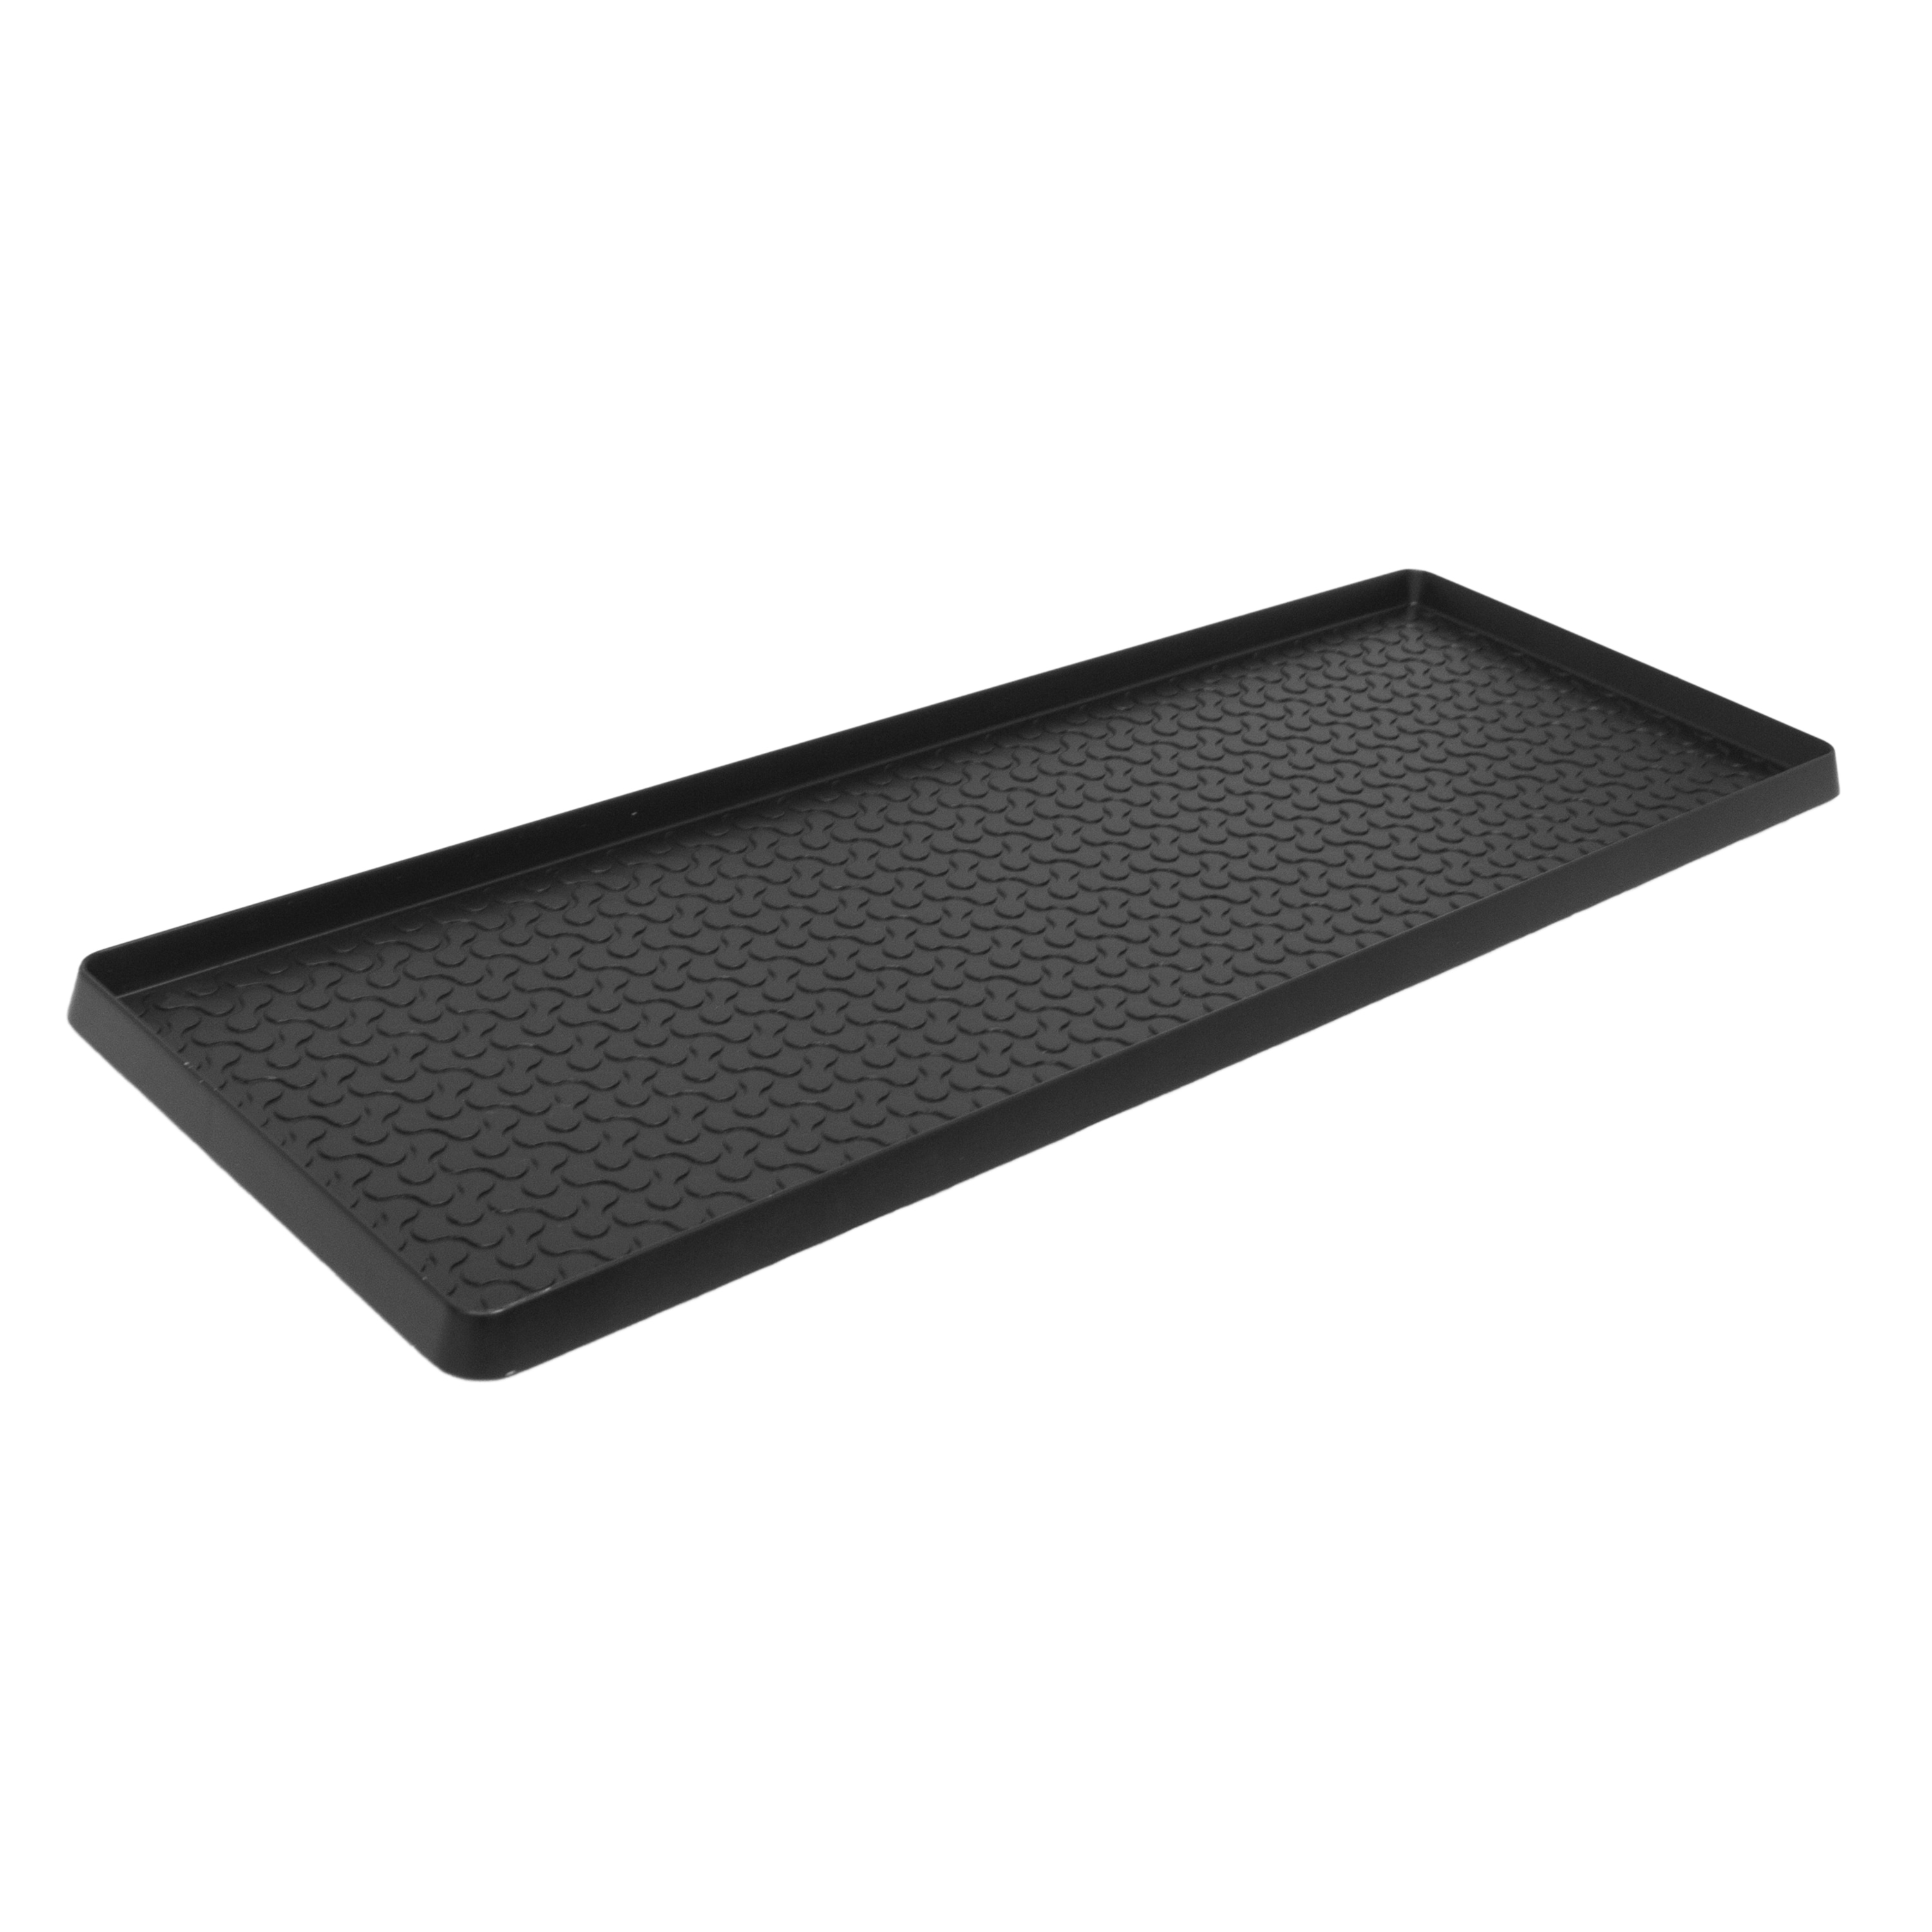 Boot Mat Tray For Floor Protection3 Pack Black Shoe Trayboot Drying Mat  W/lip Di